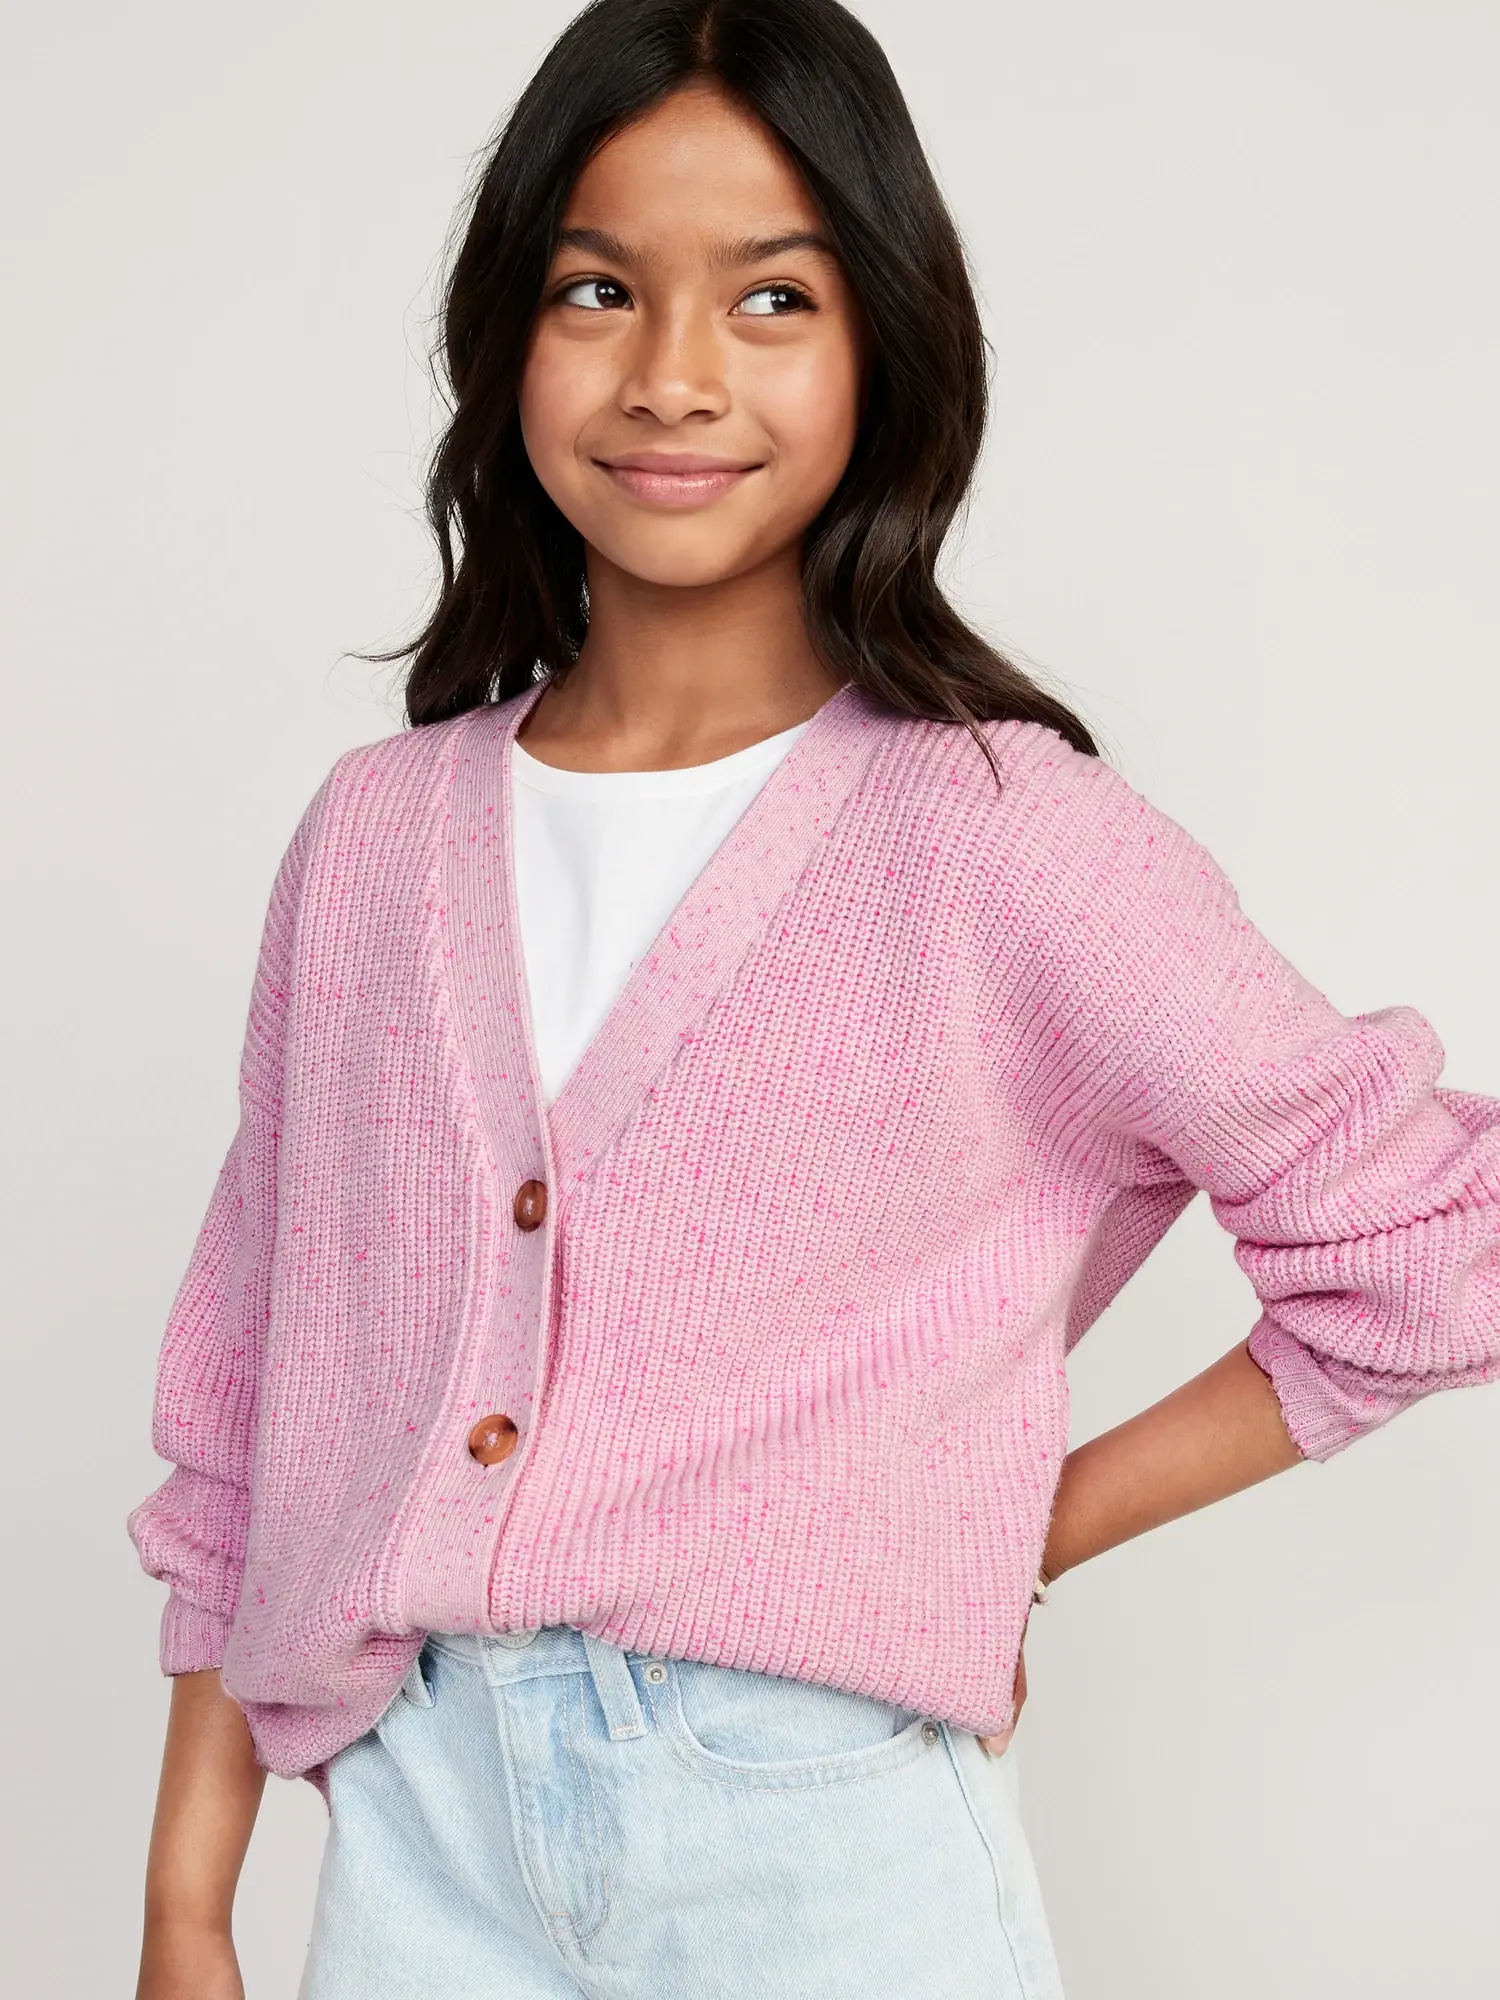 Old Navy Cocoon Cardigan for Girls pink. 1